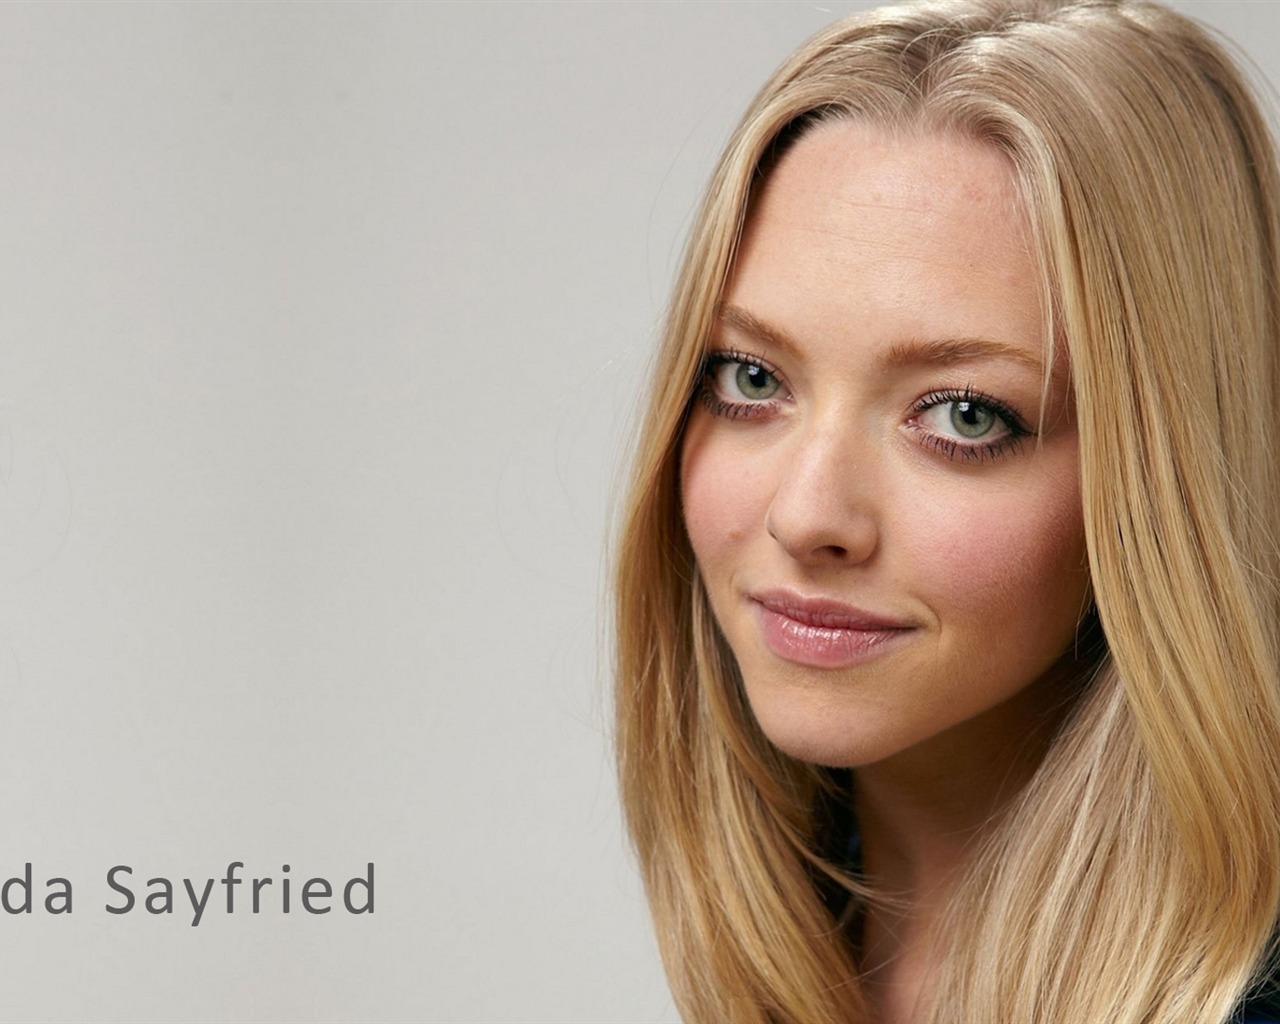 Amanda Seyfried #014 - 1280x1024 Wallpapers Pictures Photos Images